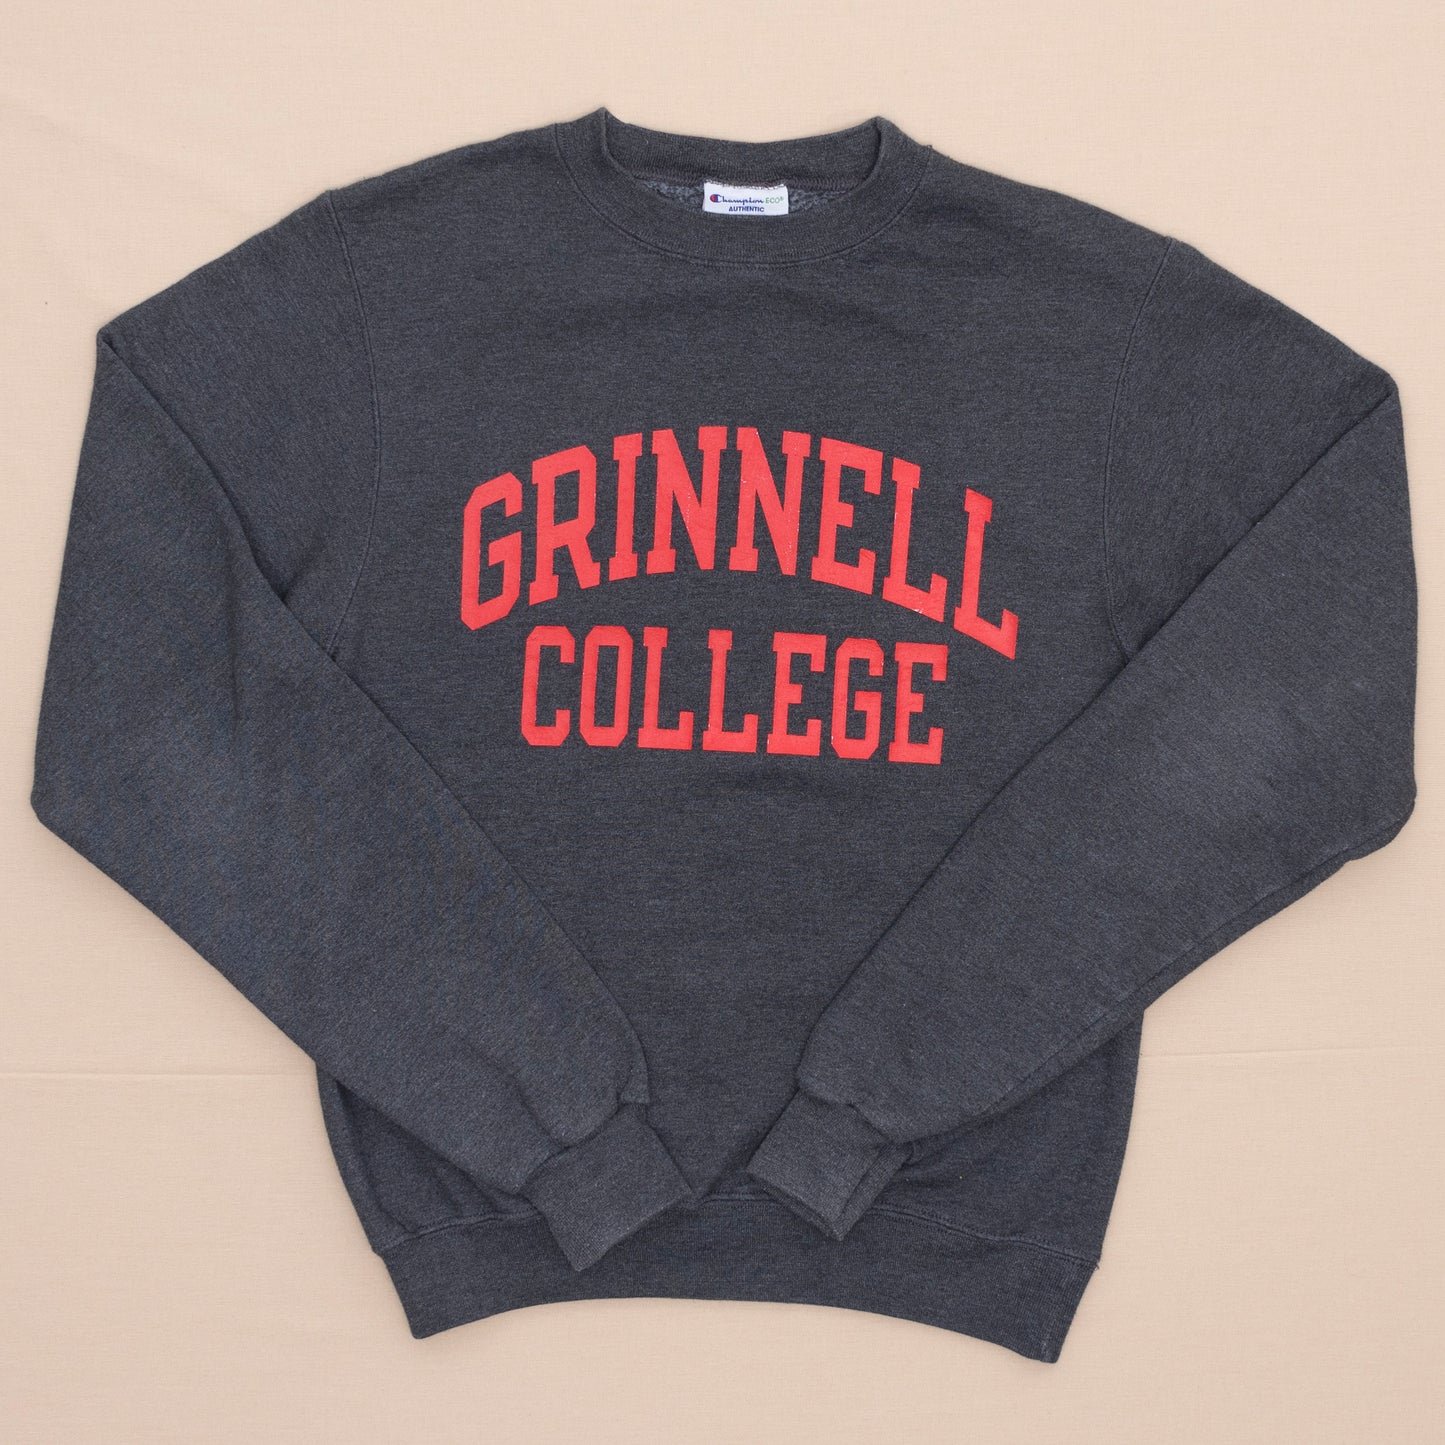 Grinnell College Sweater, XS